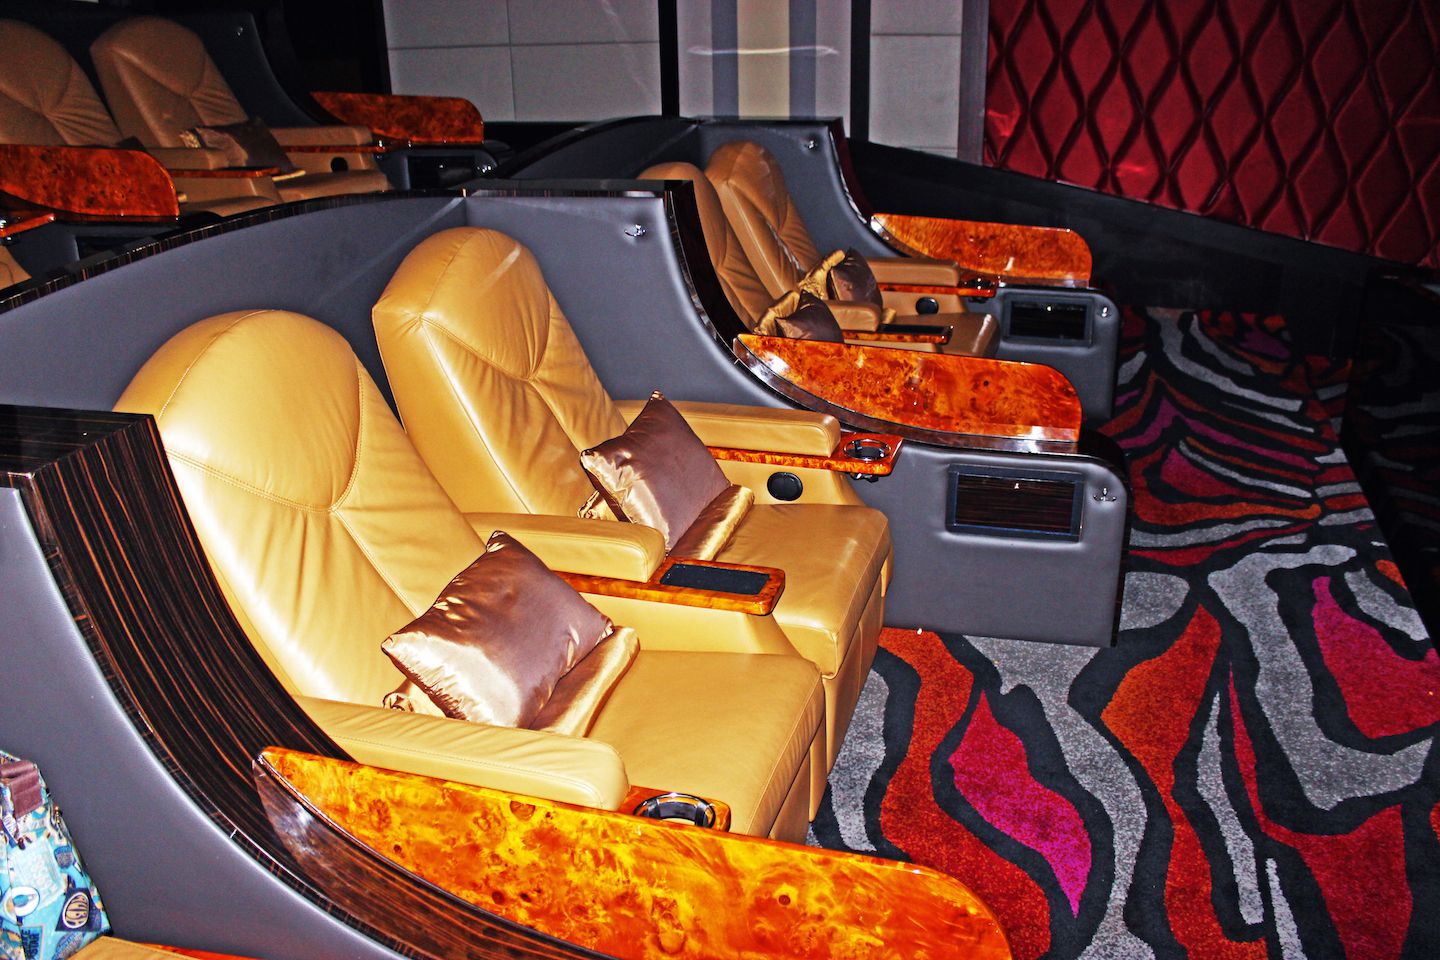 Seats in the UltraScreen theatre of the Major Cineplex in Chiang Mai